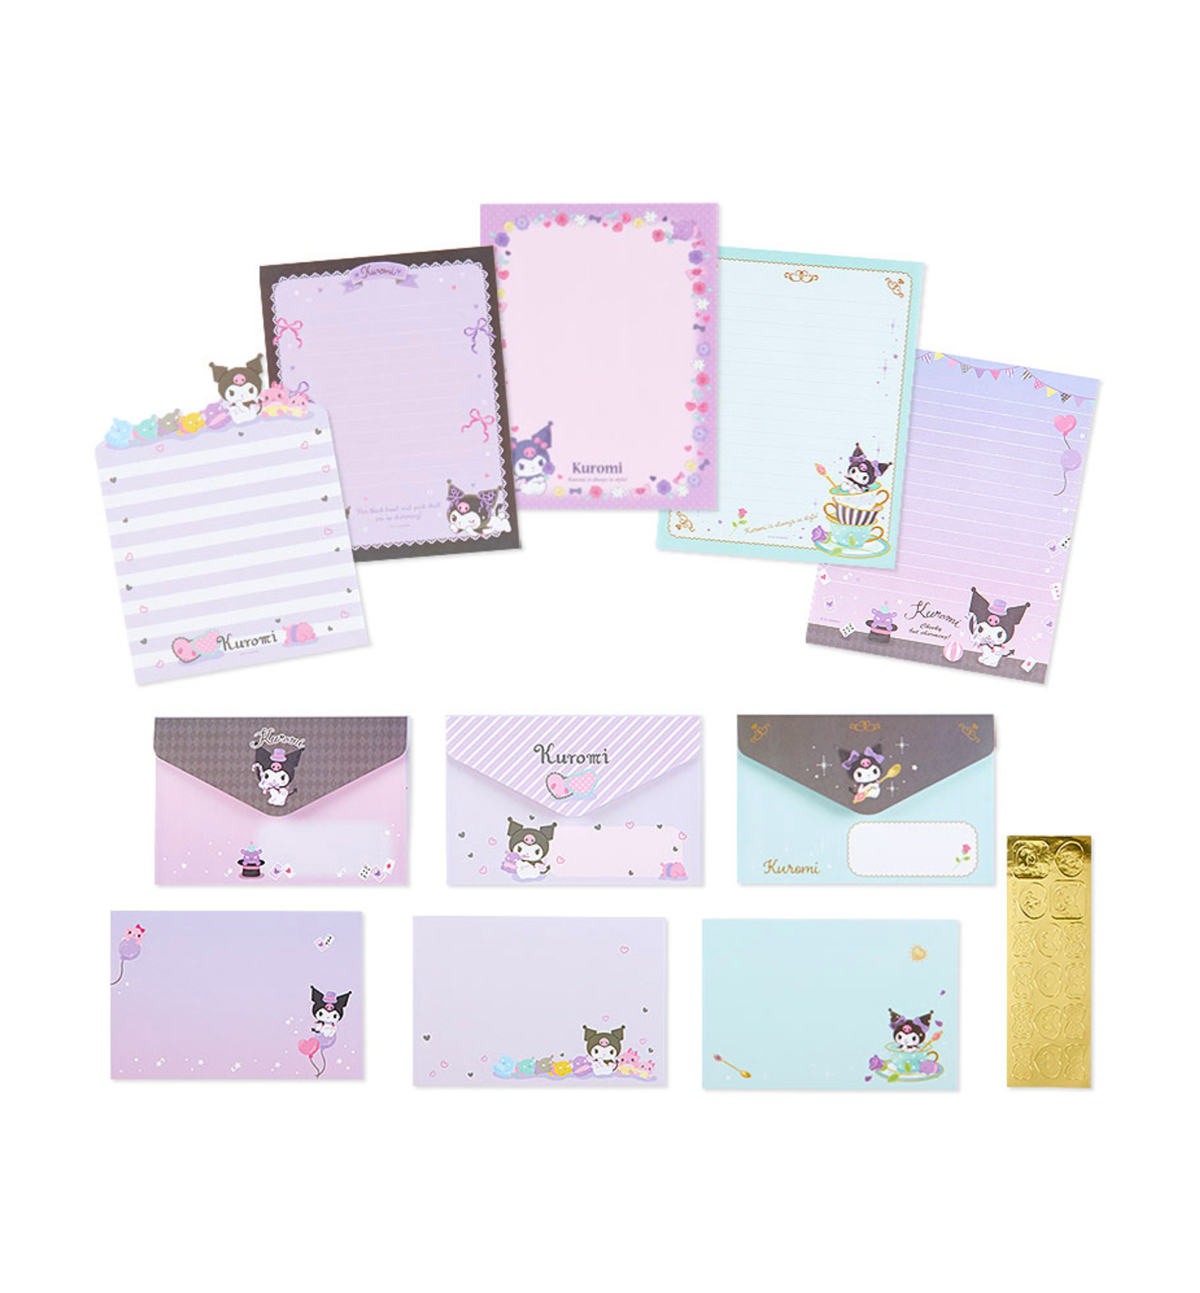 Sanrio Hello Kitty Letter Set [Side by Side]